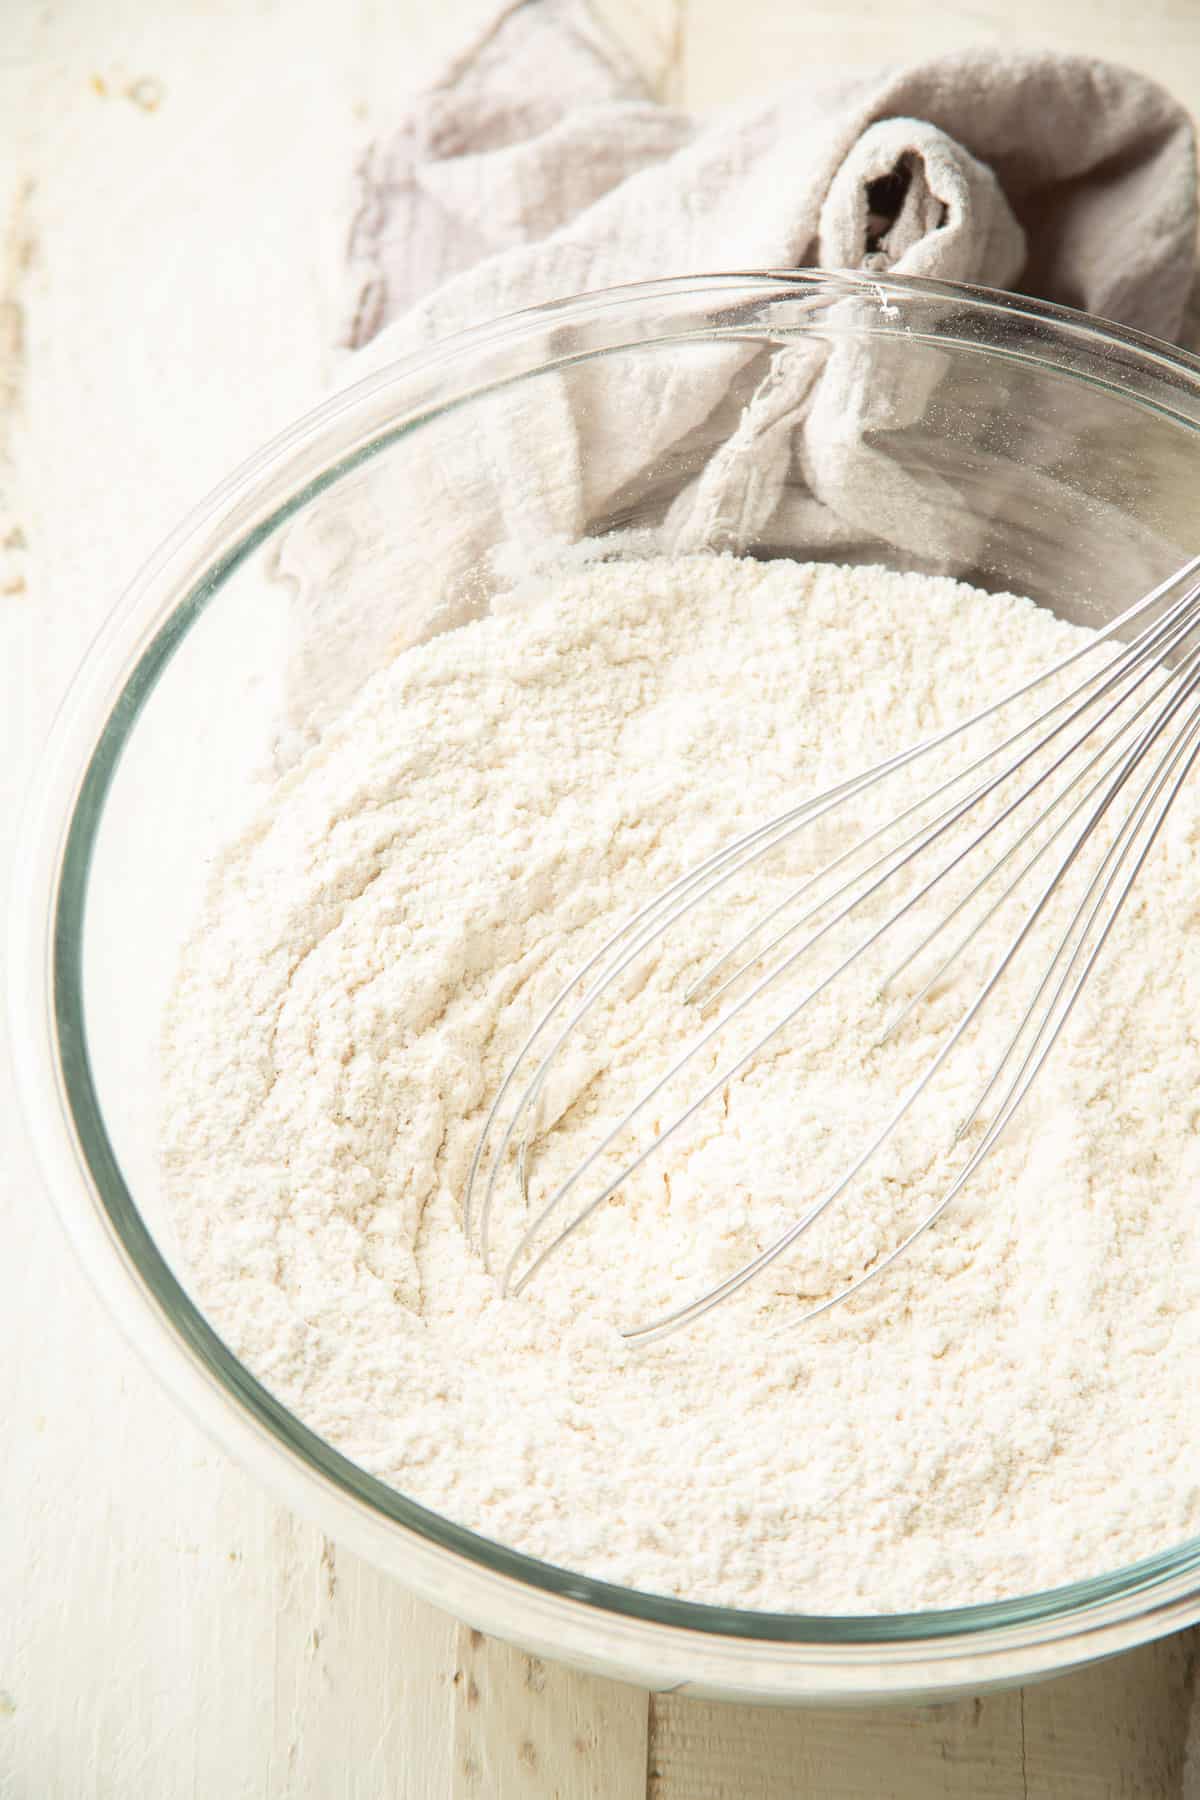 Dry ingredients for cake in a mixing bowl with whisk.